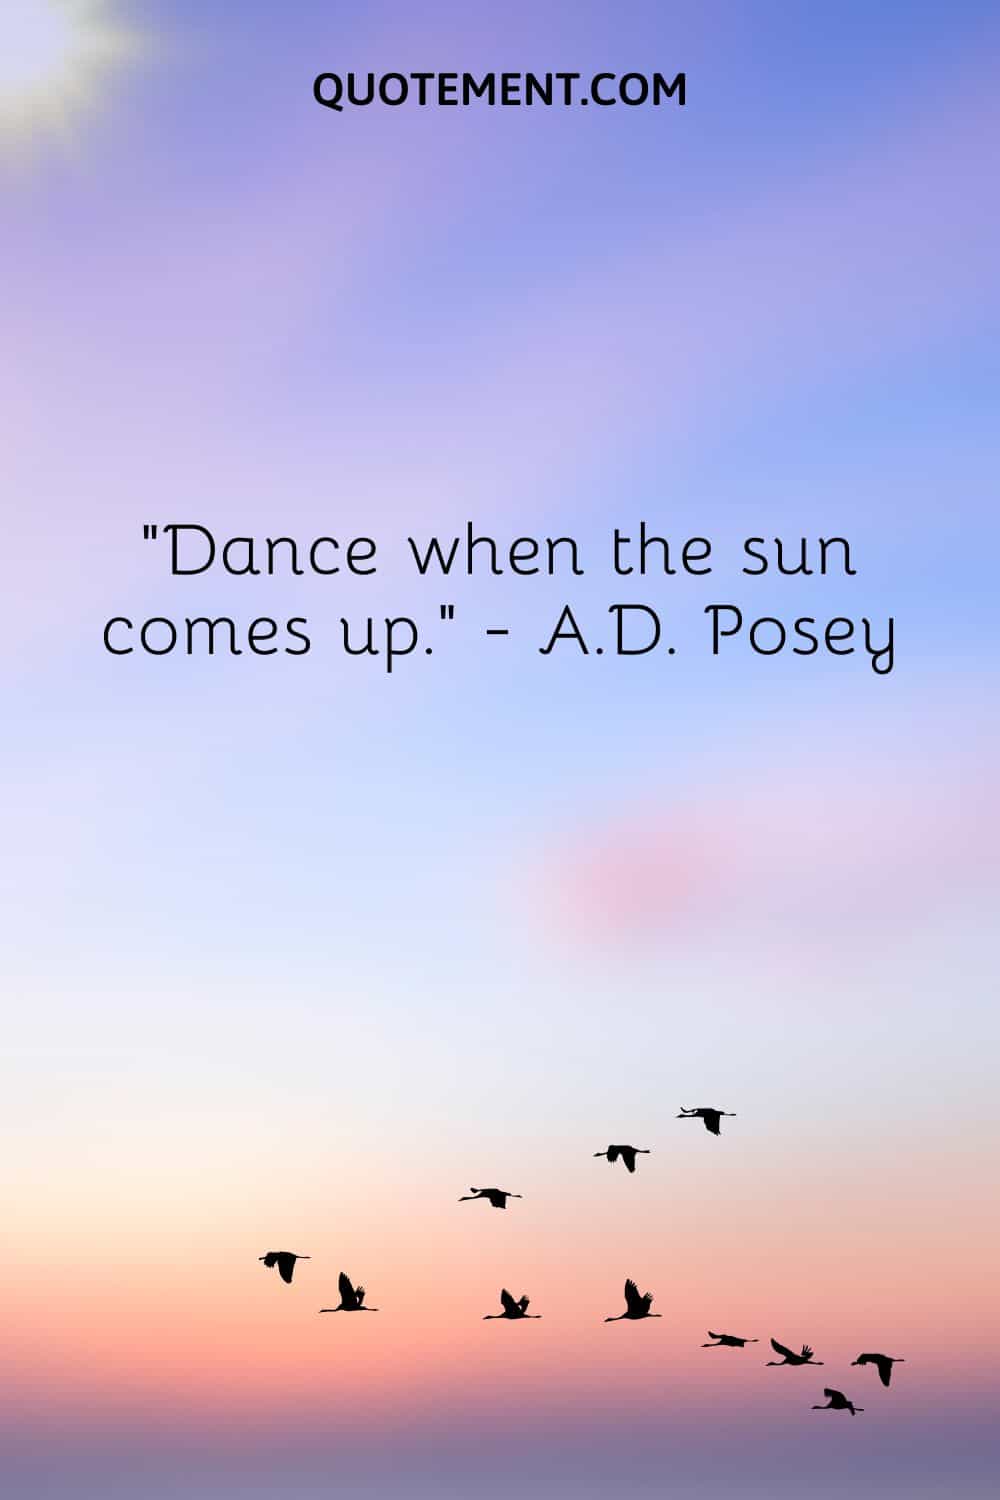 Dance when the sun comes up